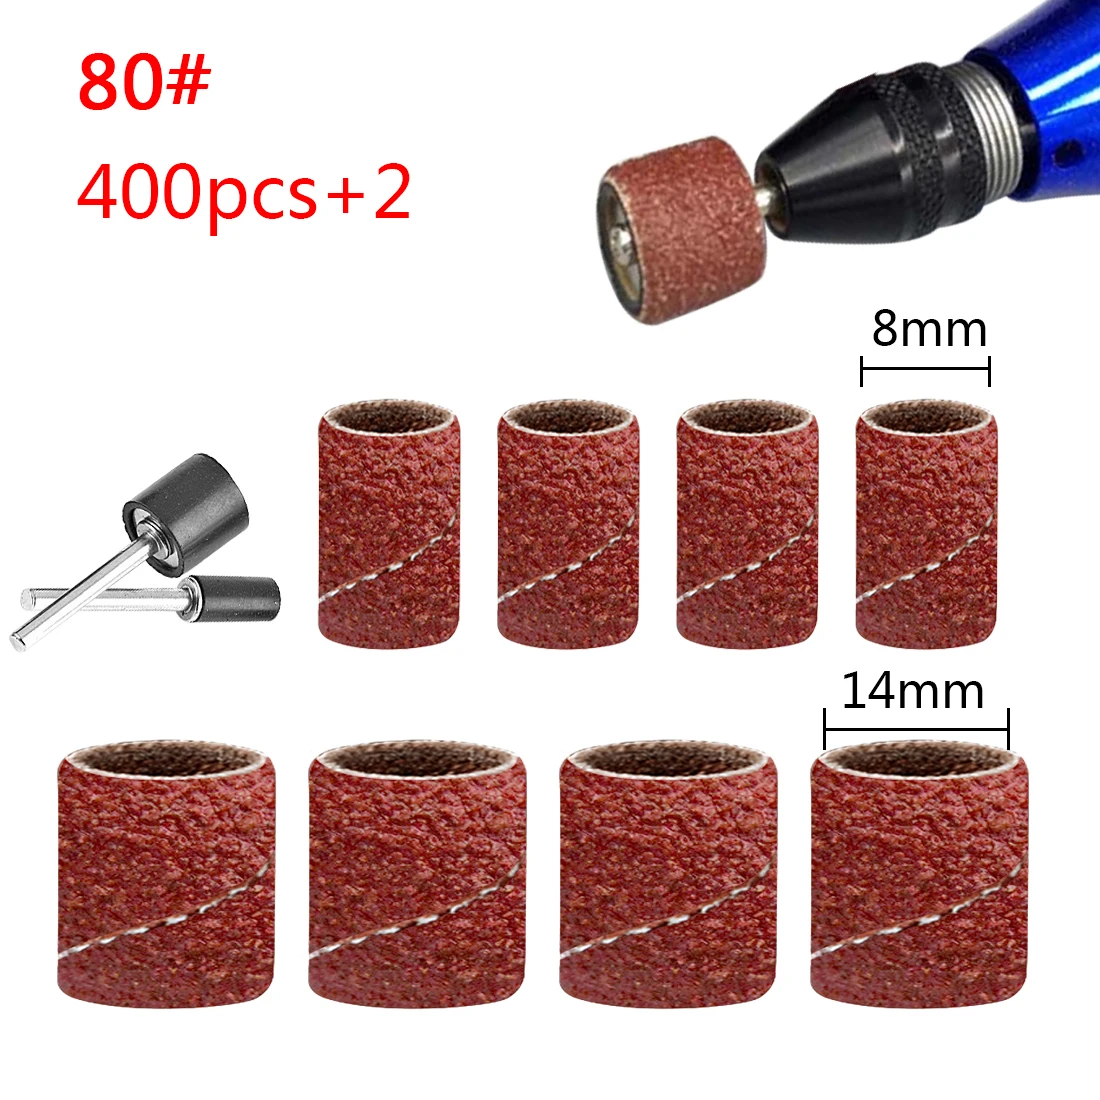 

Abrasive Tools100pcs Grit 80# Drum Sanding Kit With 4XBand Mandrel 3.15MM Shank Rotary Tools Nail Drill Bits Dremel Accessories